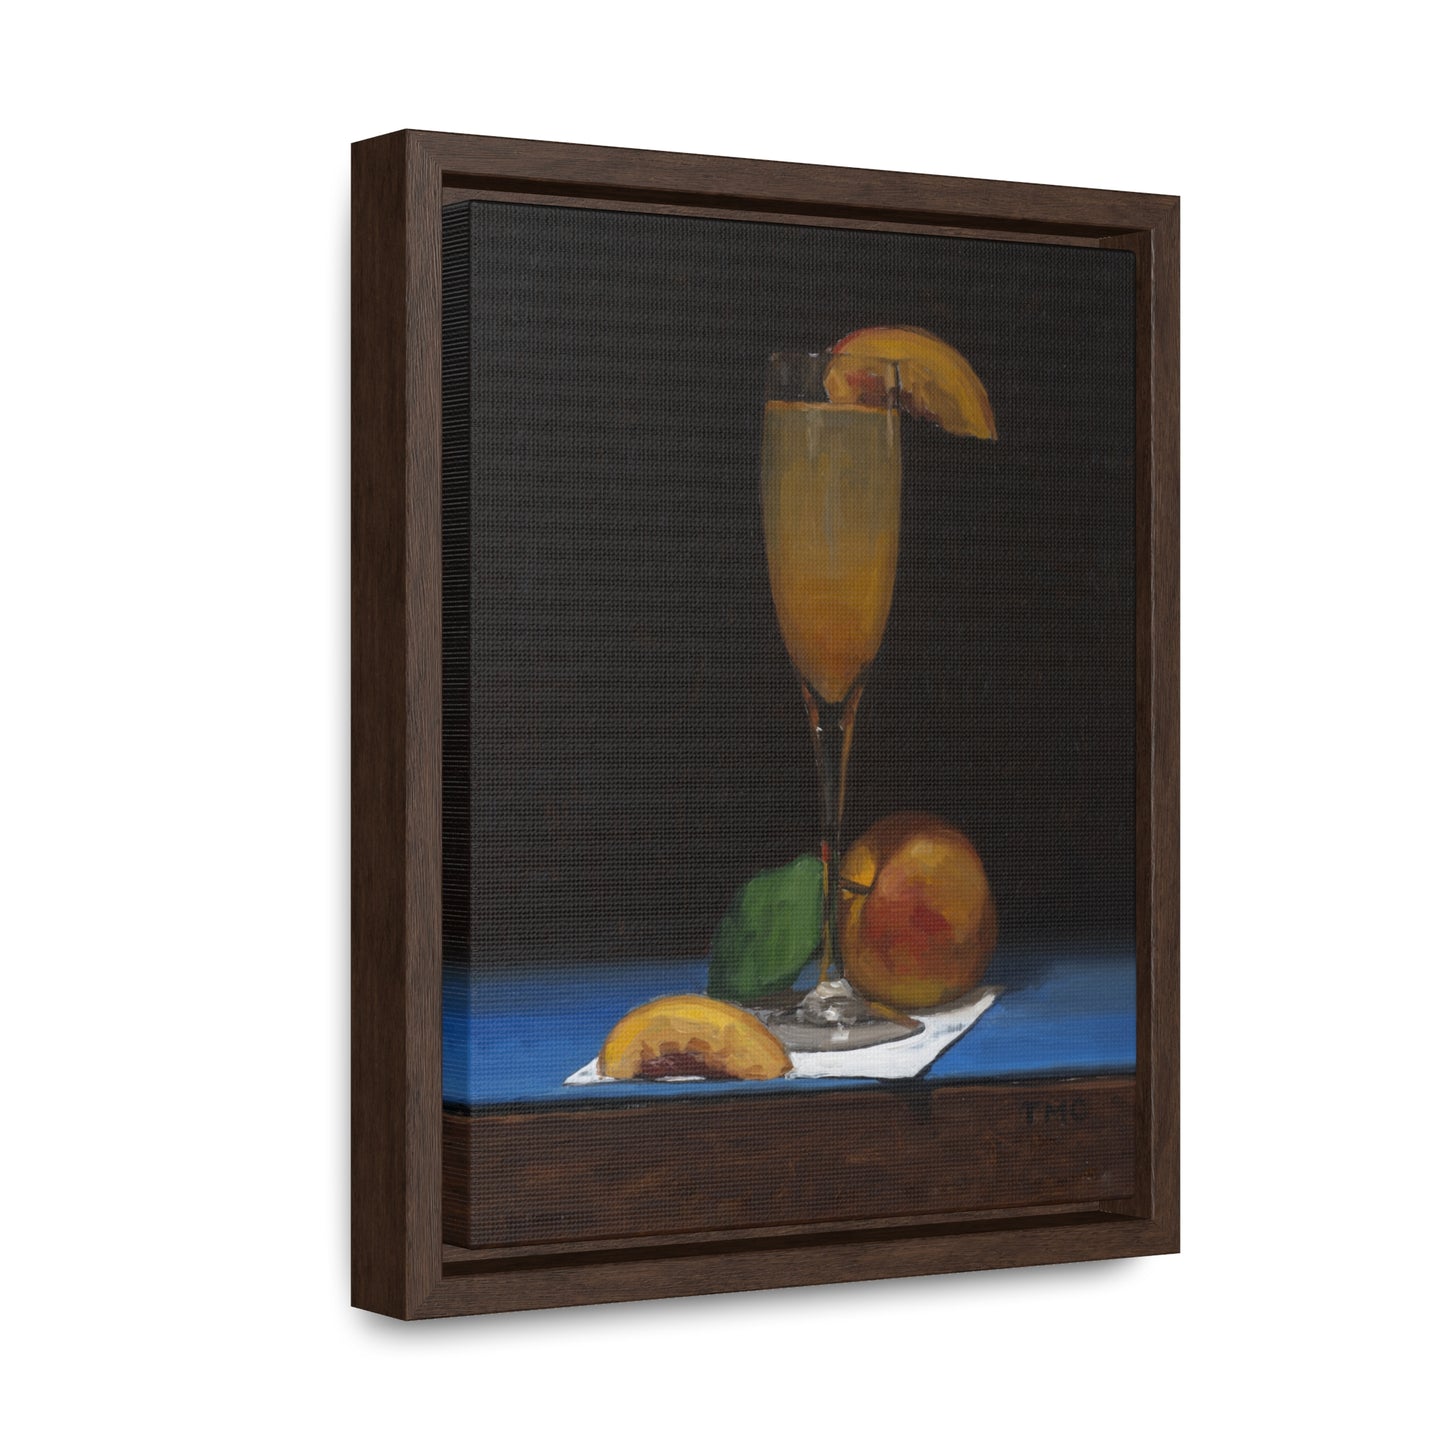 Todd M Casey: "Bellini" - Framed Canvas Reproduction